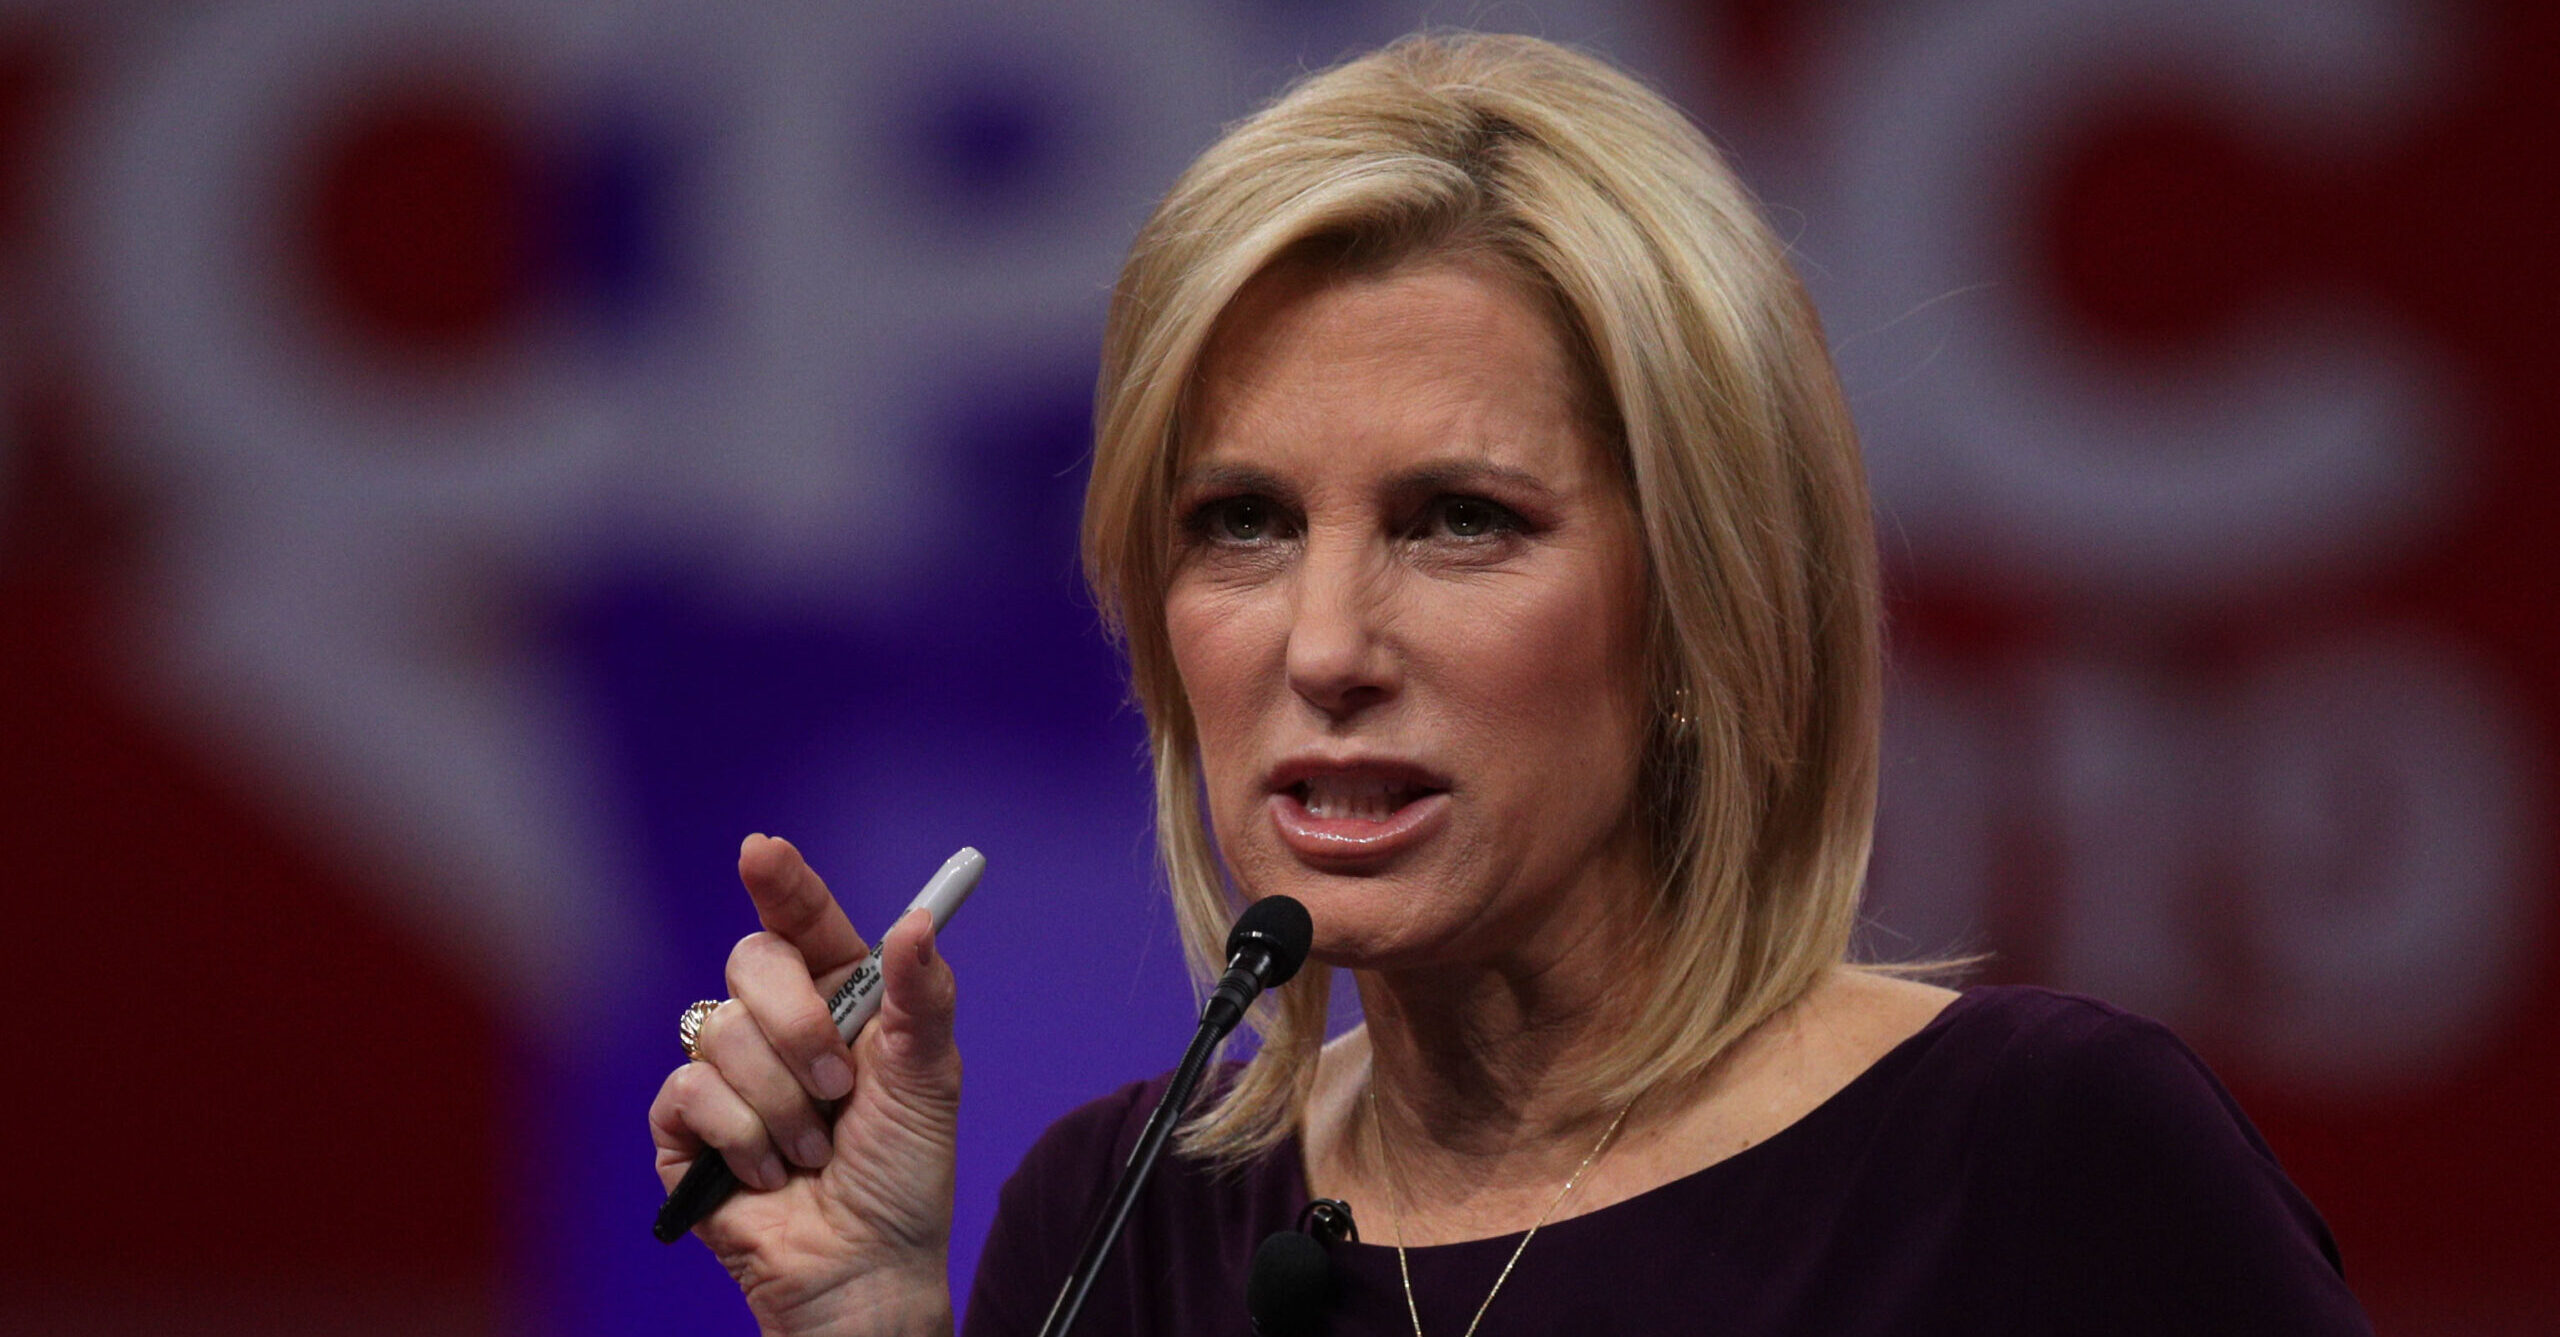 Laura Ingraham Says Her Mom Waited Tables at 73 to Help Pay Her Student Debt – Gets Promptly Dragged on Twitter for Opposing Debt Forgiveness